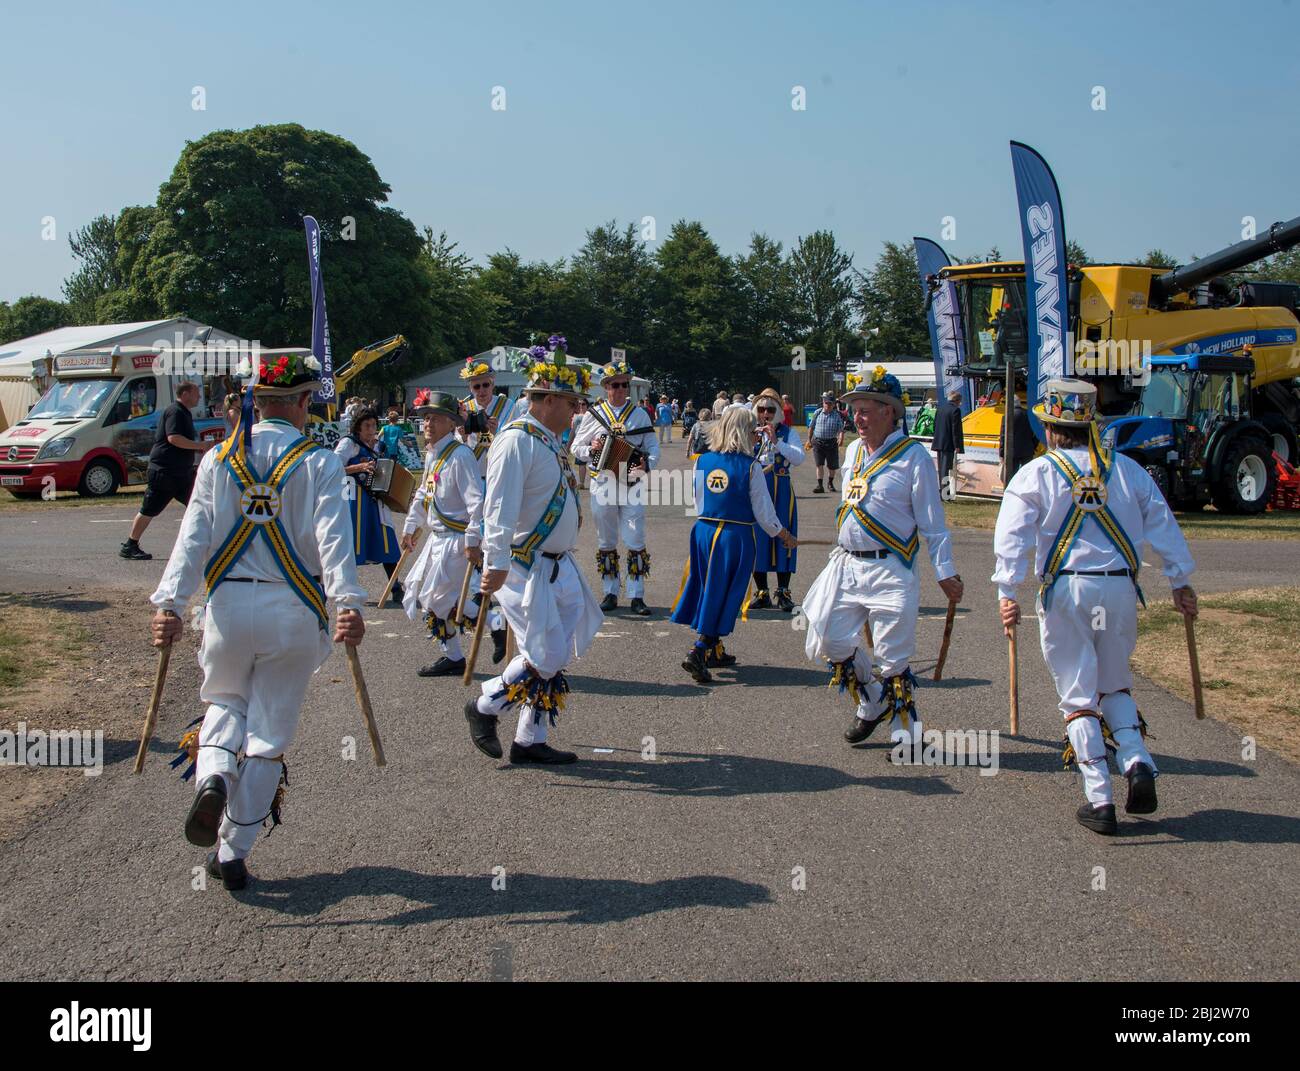 KENT COUNTY SHOW,KENT,UK- JULY 6 2018: Morris Dancers perform at the annual Kent County Show in the UK. Morris dancing is a form of English folk dance Stock Photo